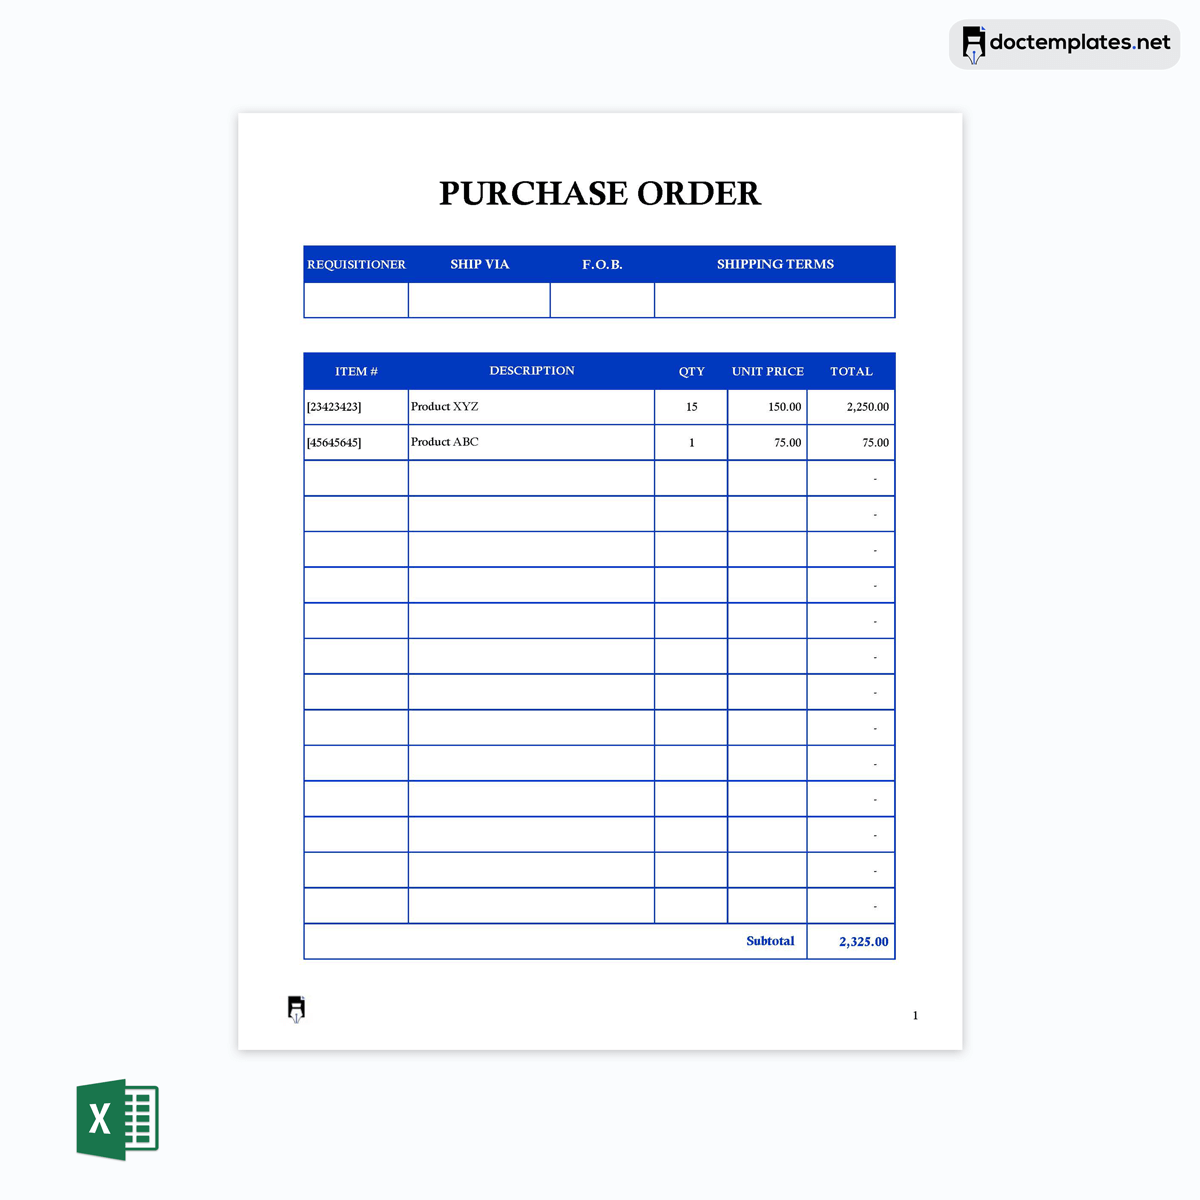 Purchase Order excel